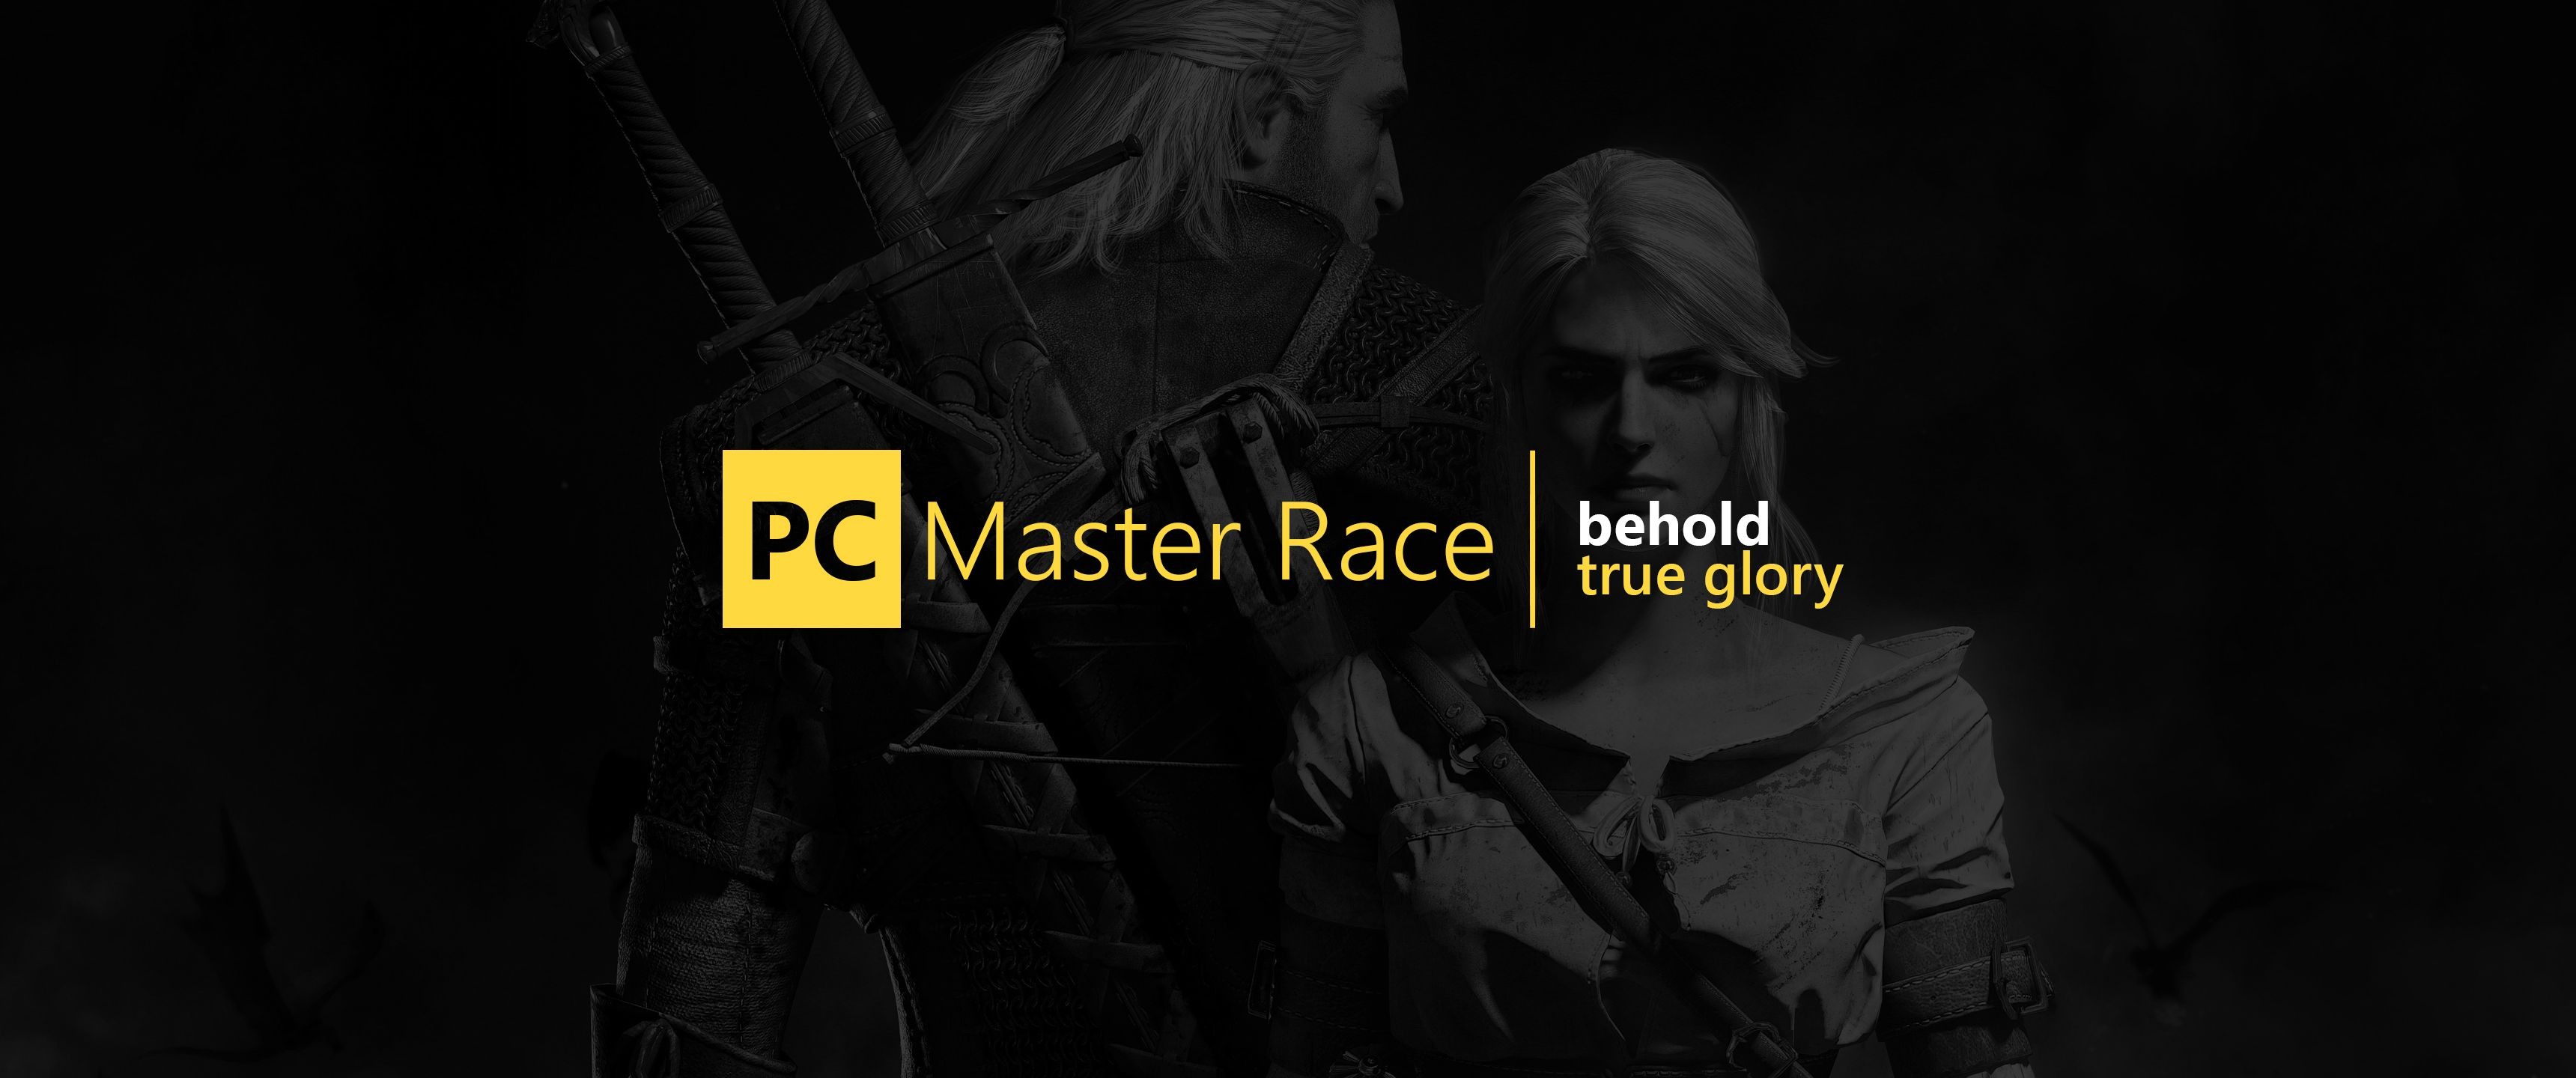 General 3440x1440 PC gaming PC Master  Race Geralt of Rivia The Witcher The Witcher 3: Wild Hunt Cirilla Fiona Elen Riannon video games video game girls video game man